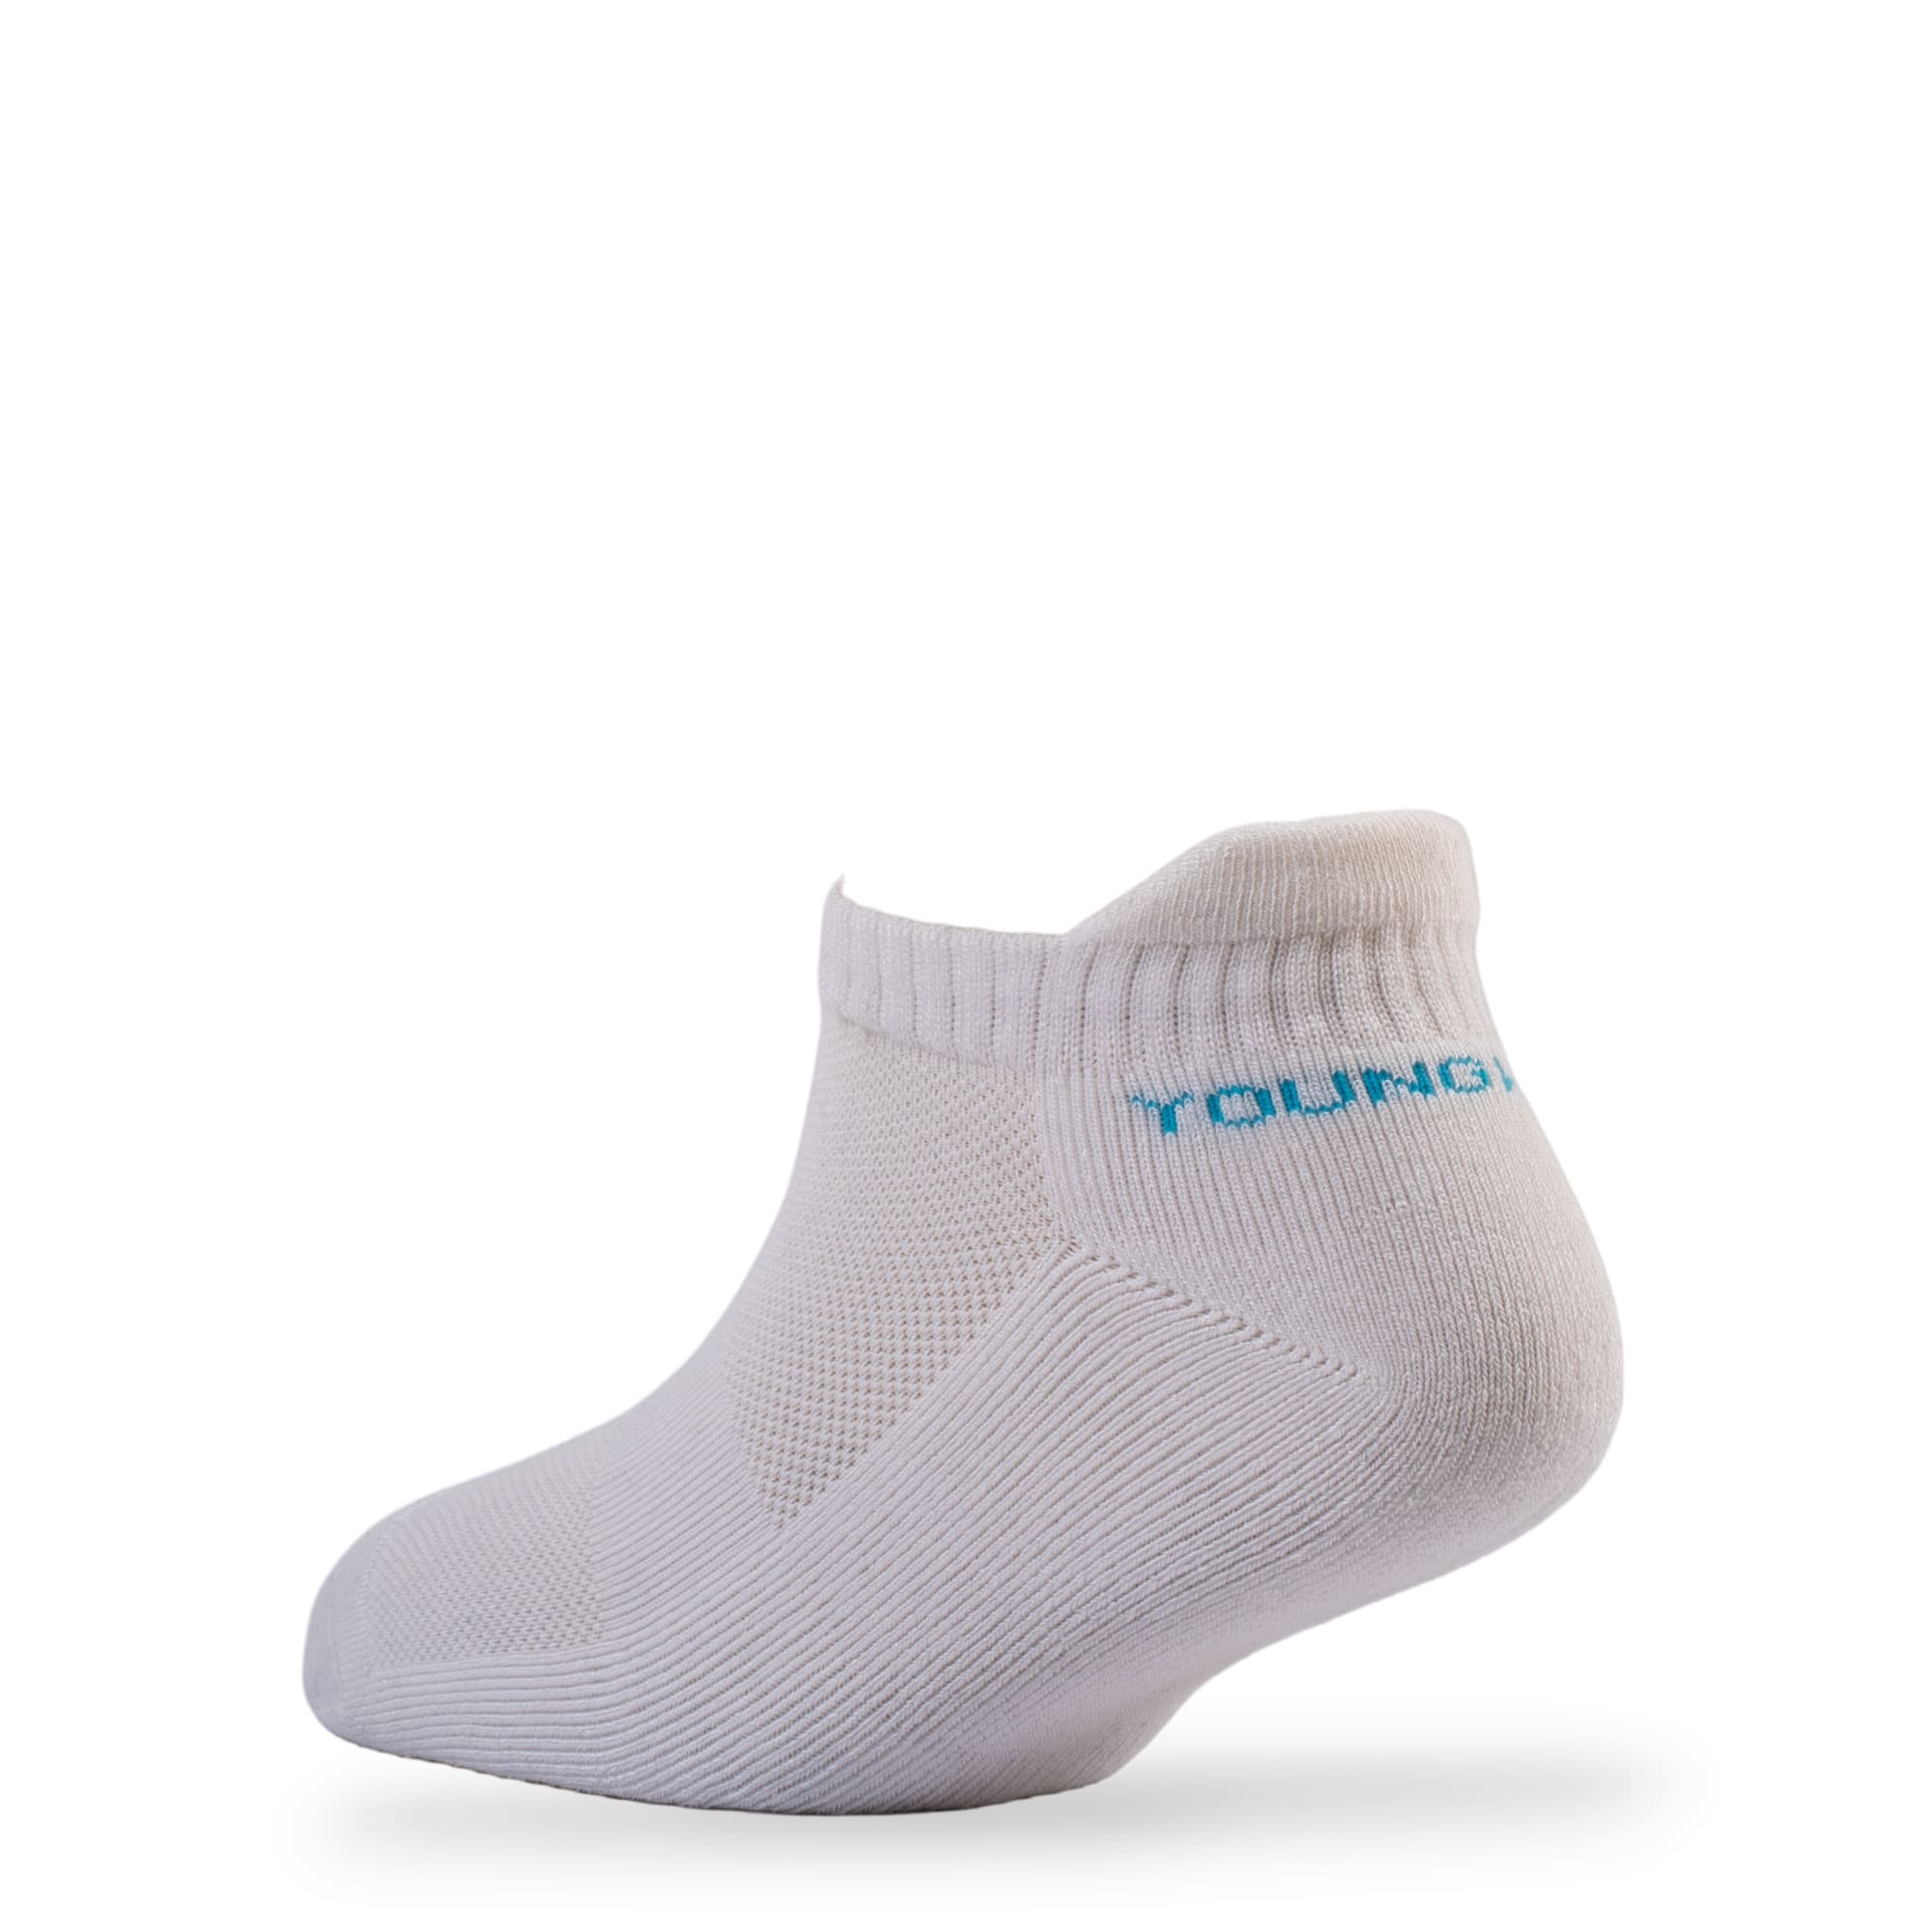 Young Wings Bamboo Fabric Multicolour Solid Design Ankle Length Sports Socks - Pack of 3, Style no.2613-M3